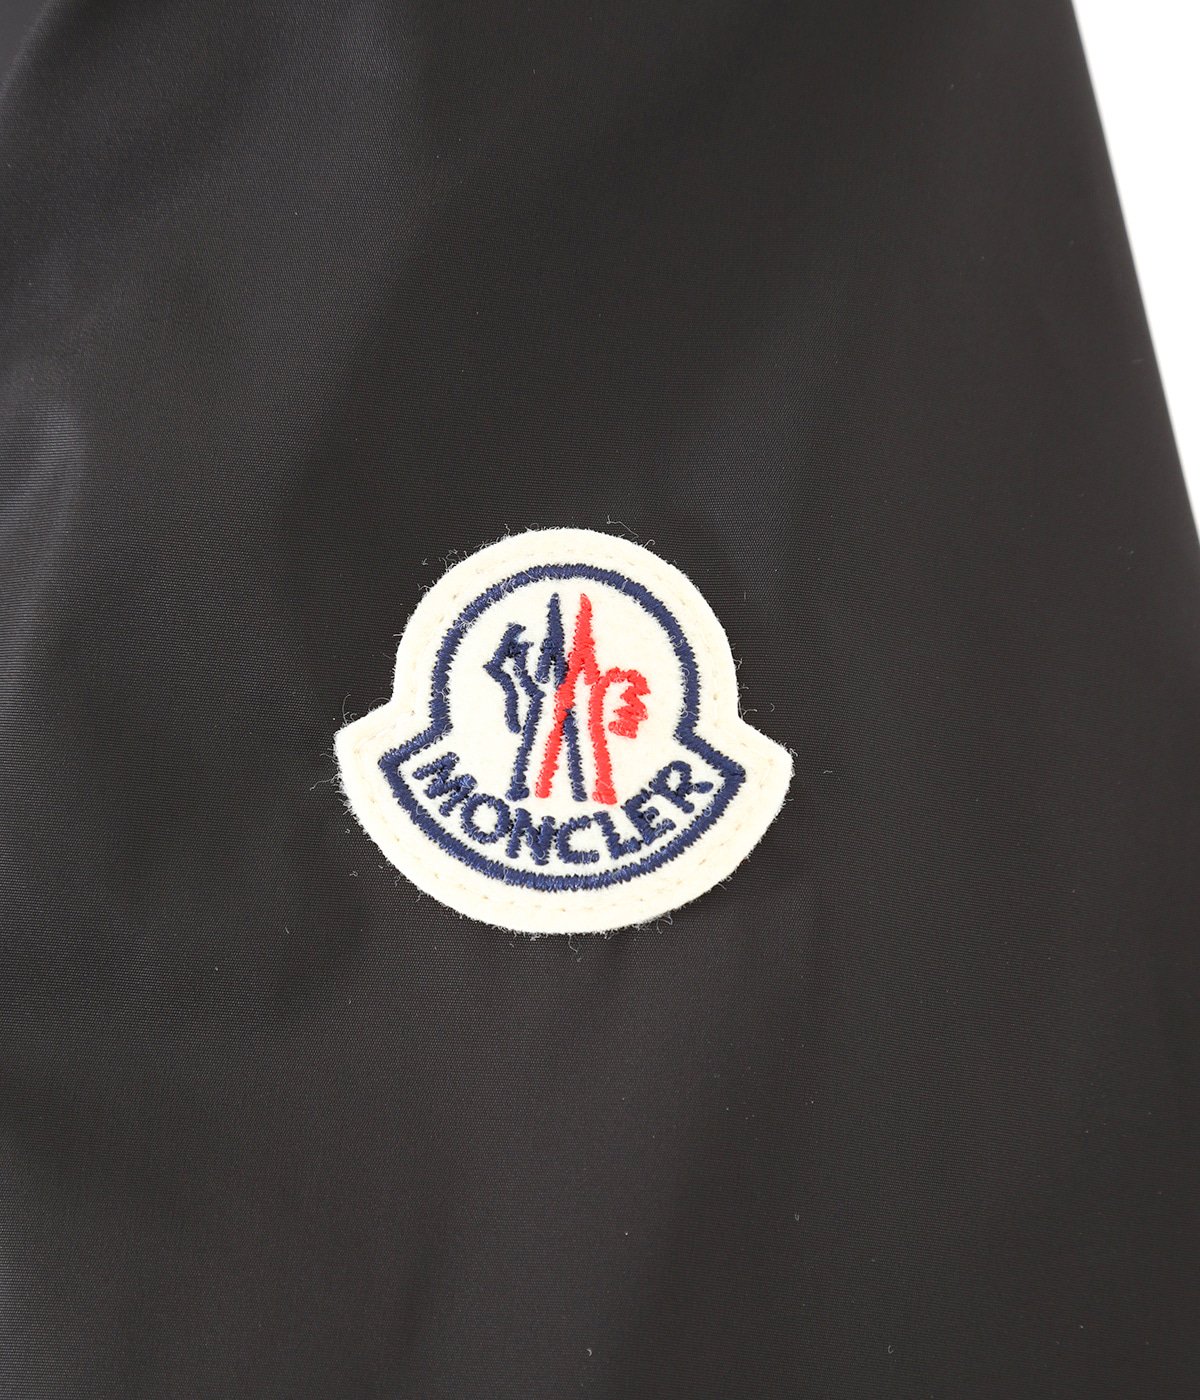 GRIMPEURS JACKET | MONCLER(モンクレール) / アウター ナイロン 